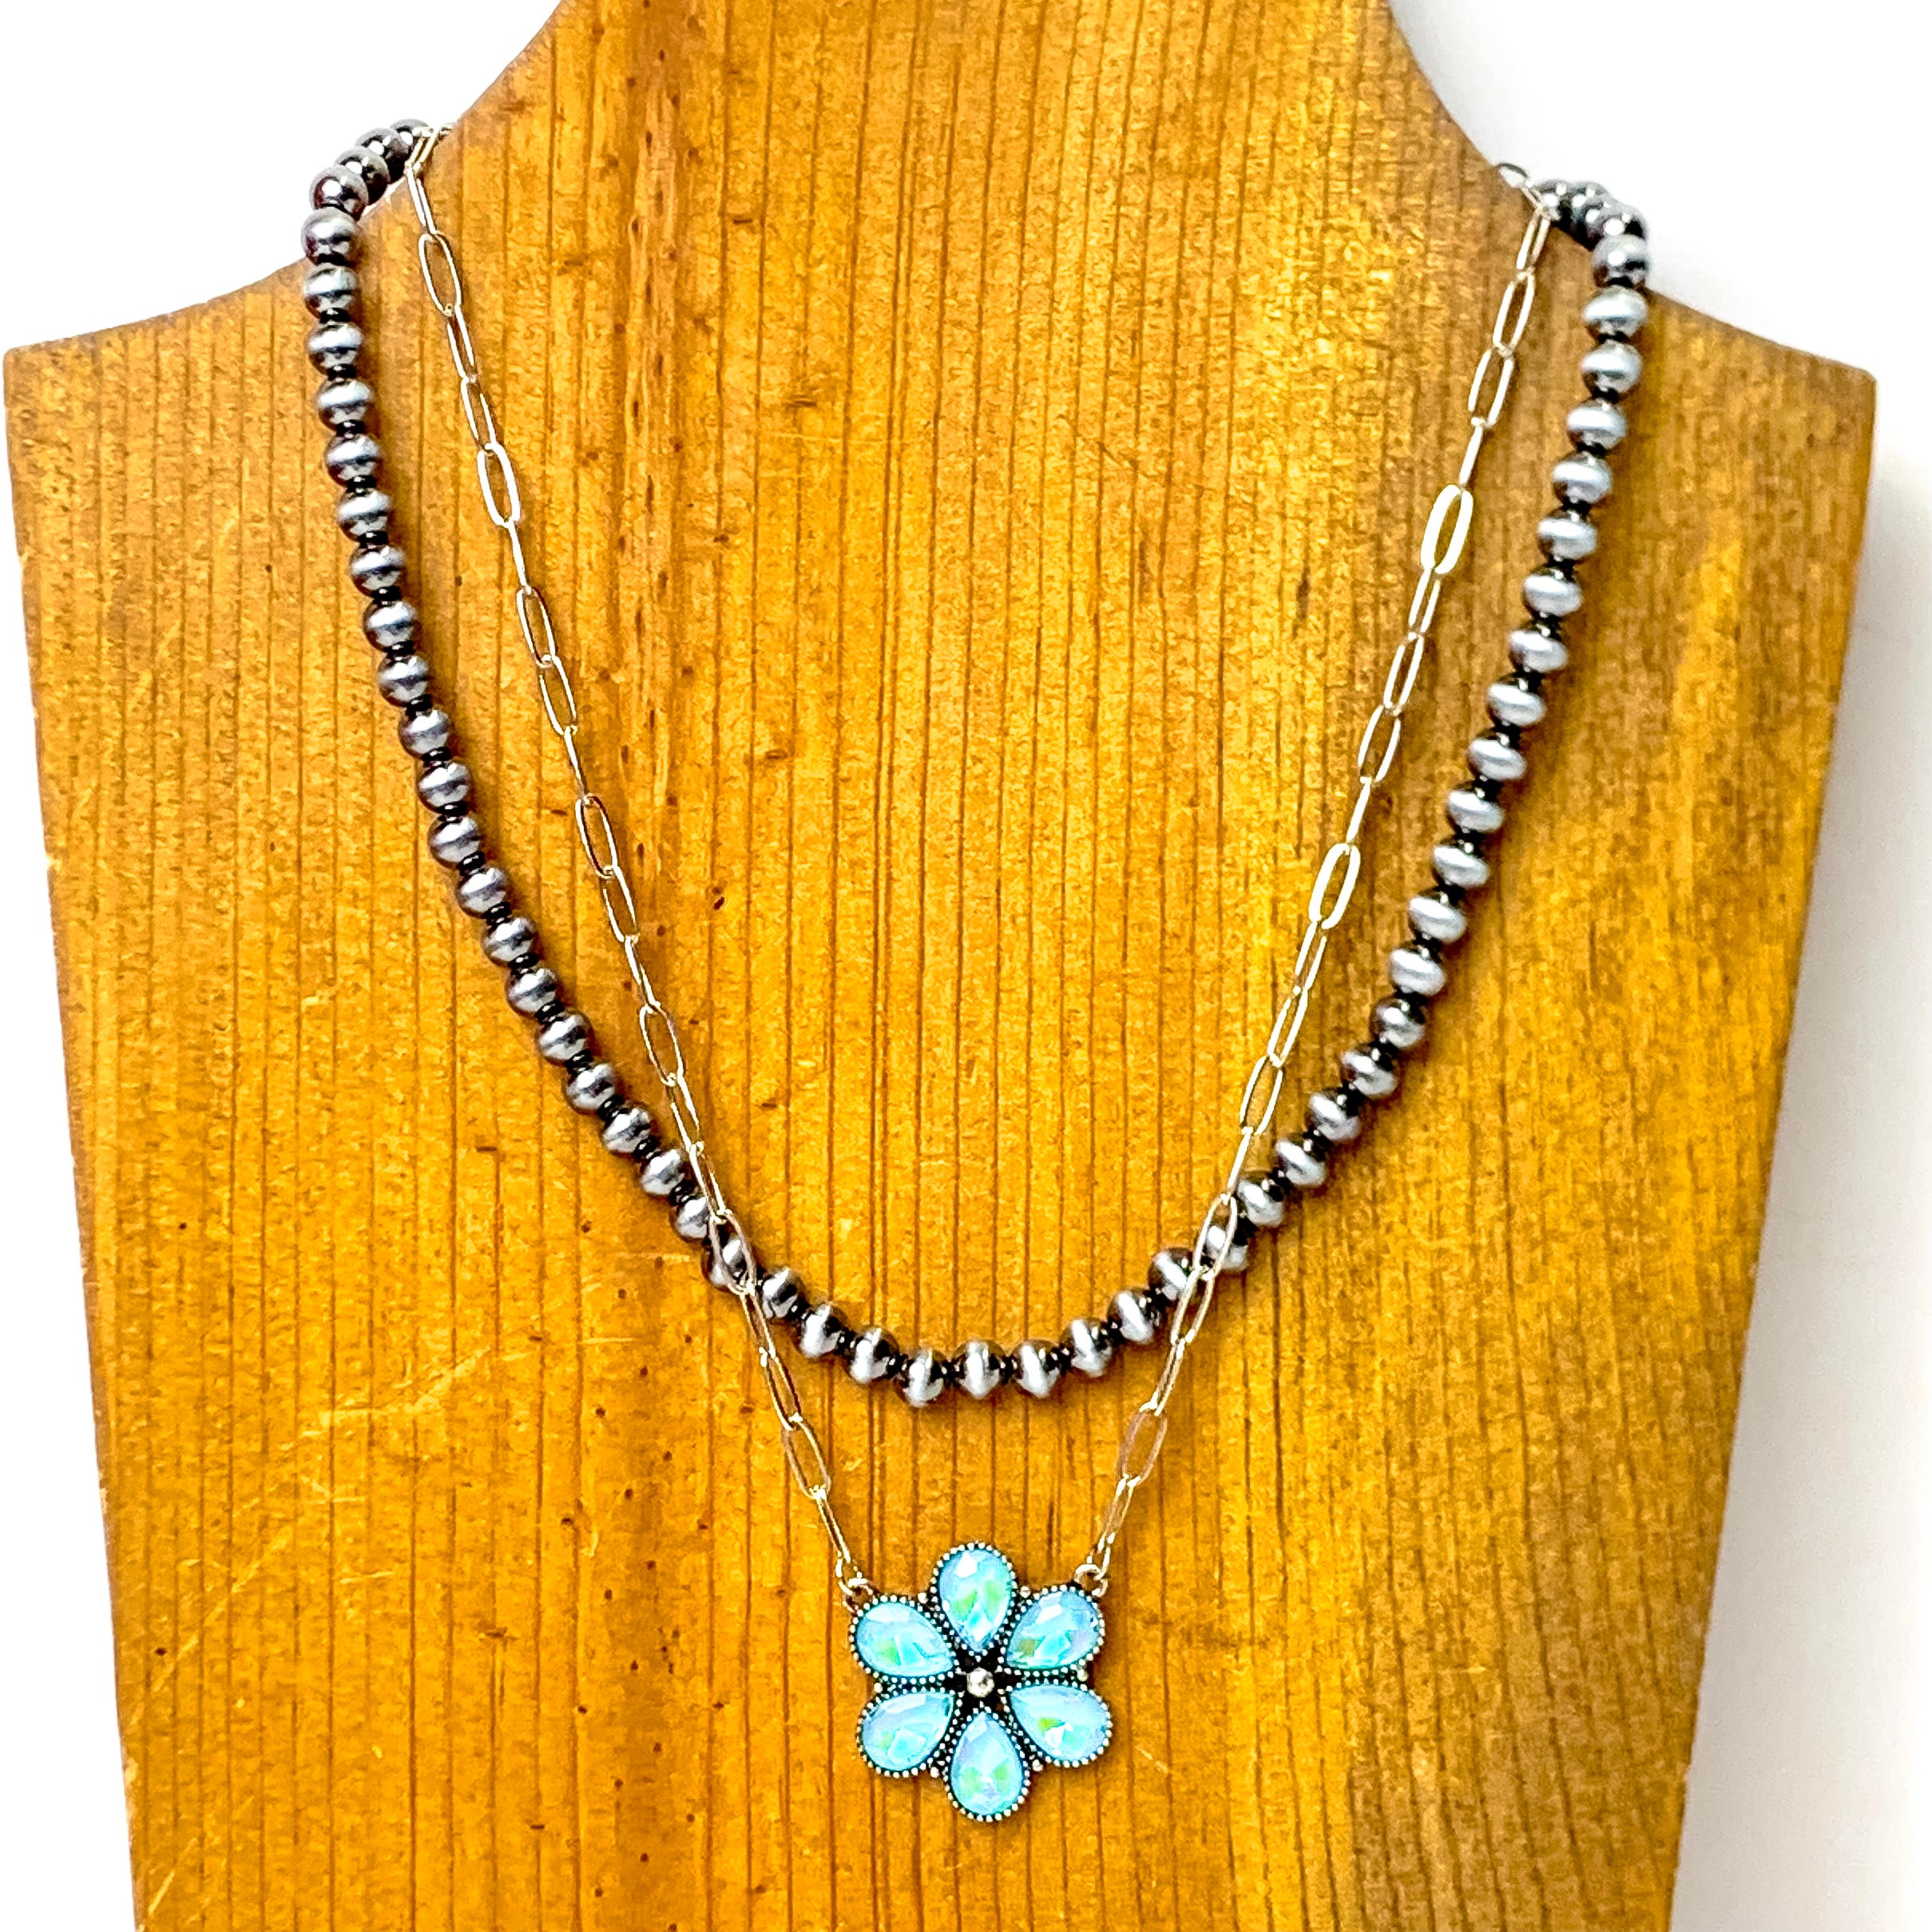 Prairie Petals Faux Navajo Pearl and Chain Necklace in Turquoise Blue and Silver Tone - Giddy Up Glamour Boutique